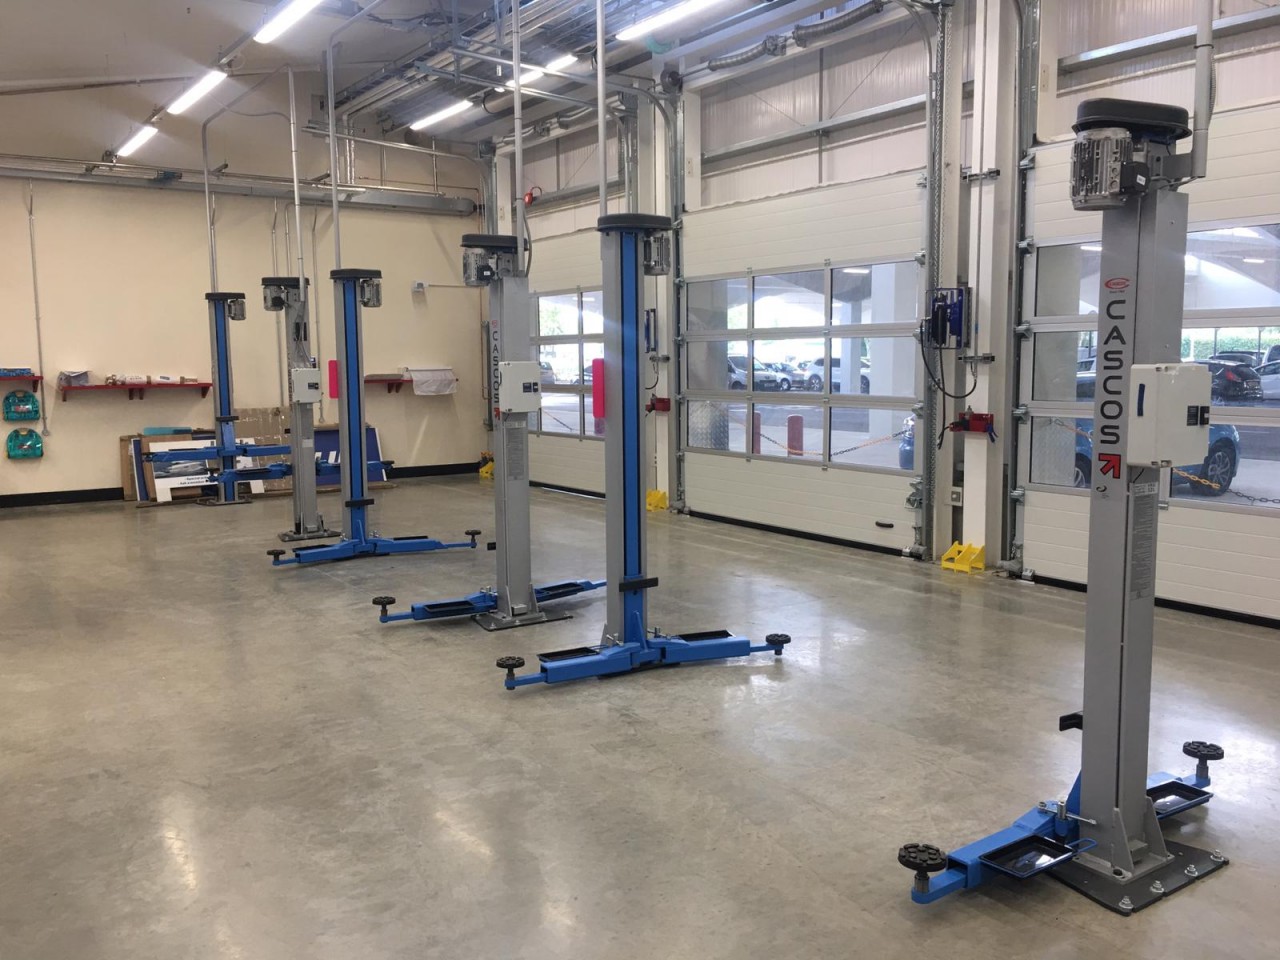 We supplied and installed two brand new 3.2 Tonne Two Post Lifts and one 4.0 Tonne Two Post Lift at Stevenage.